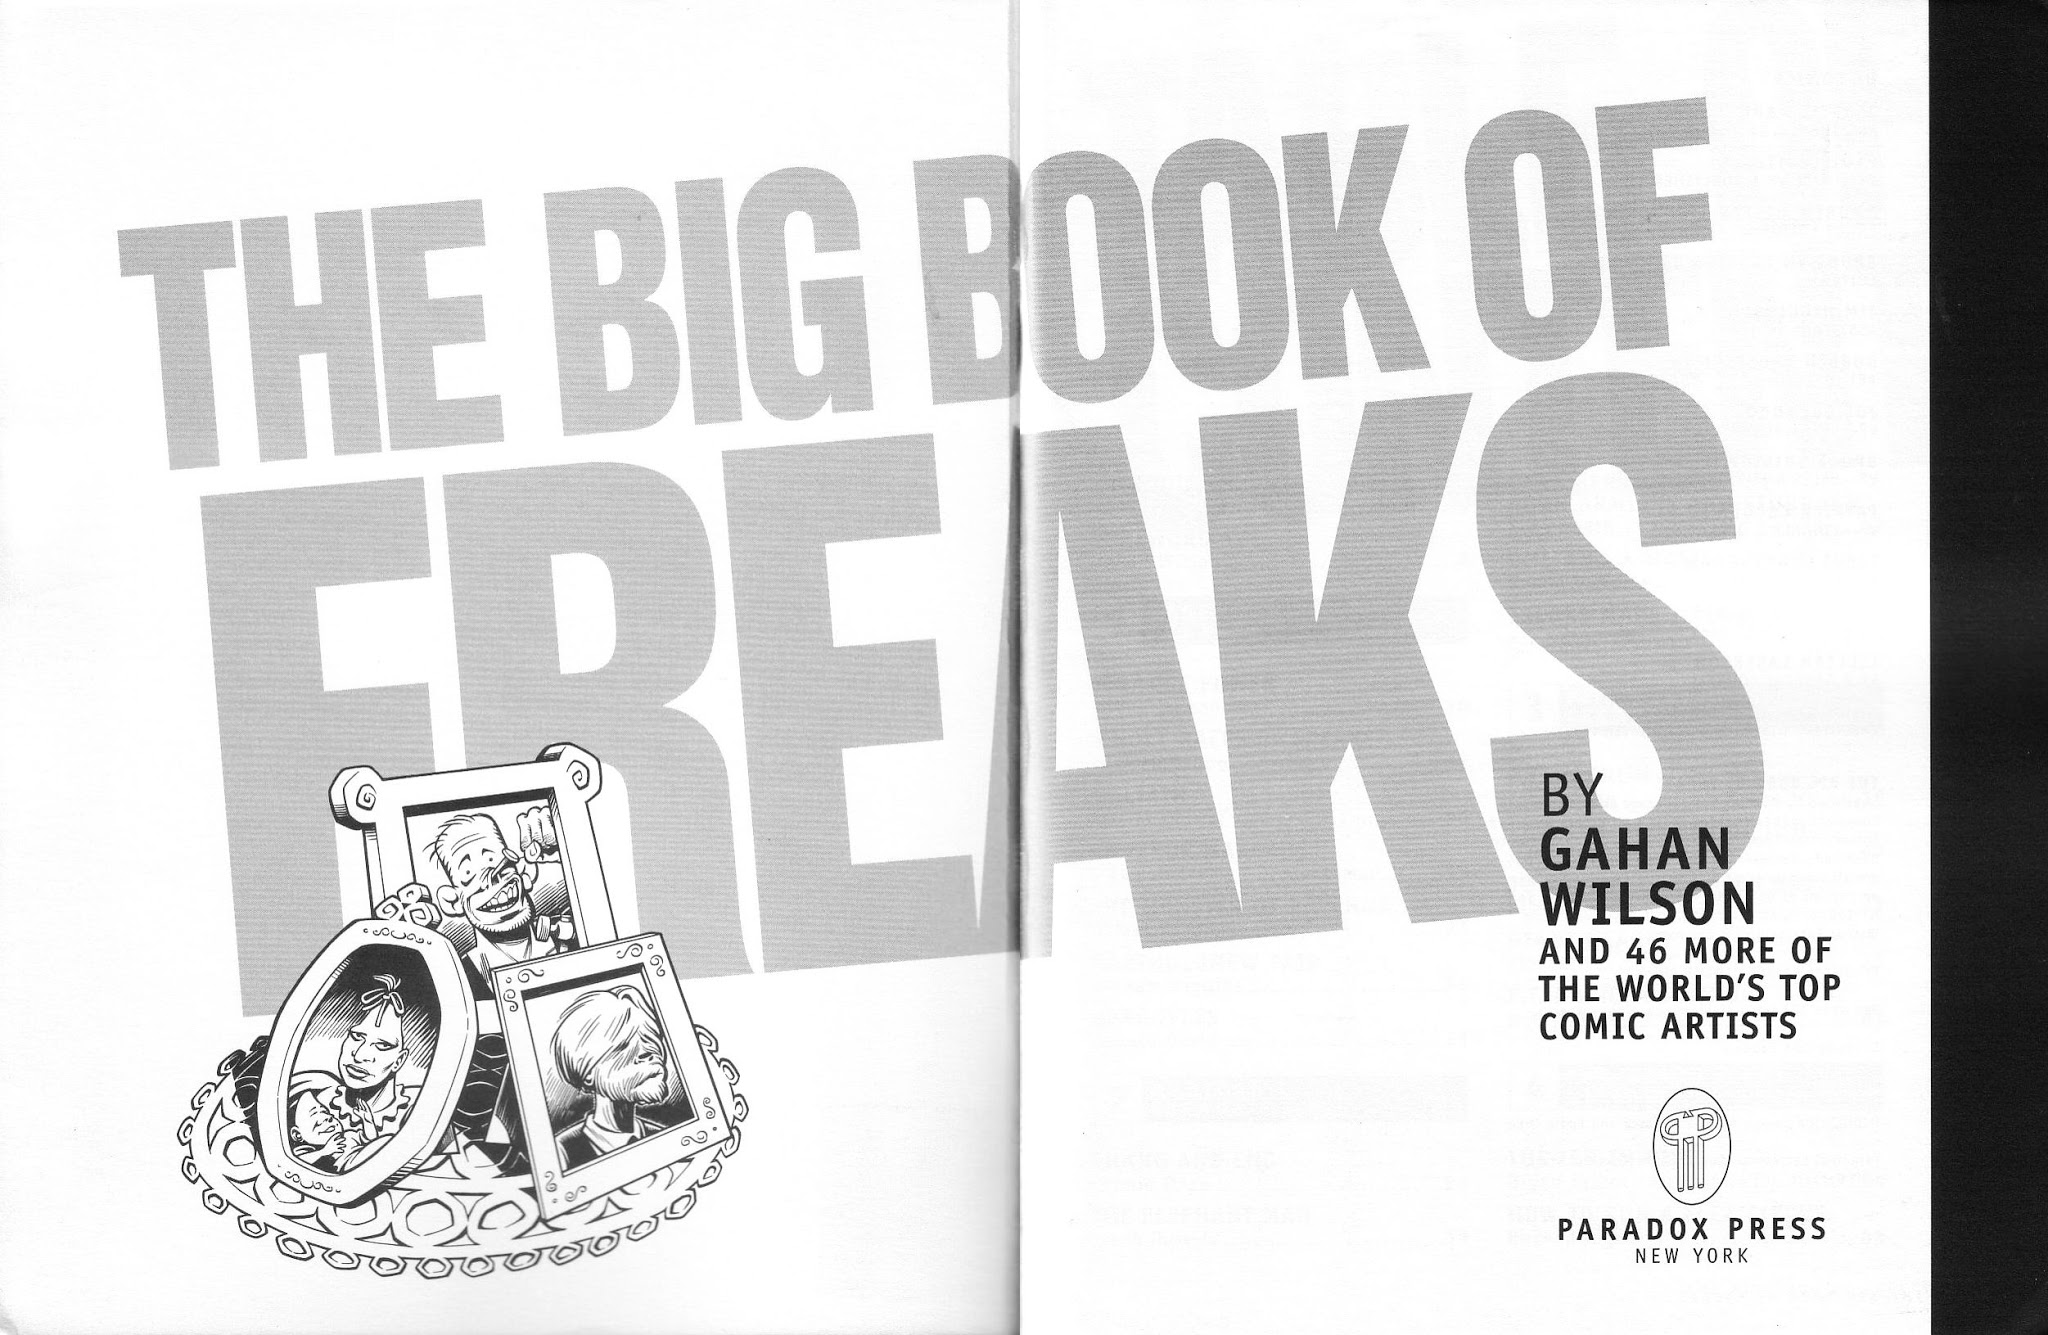 Read online The Big Book of... comic -  Issue # TPB Freaks - 2